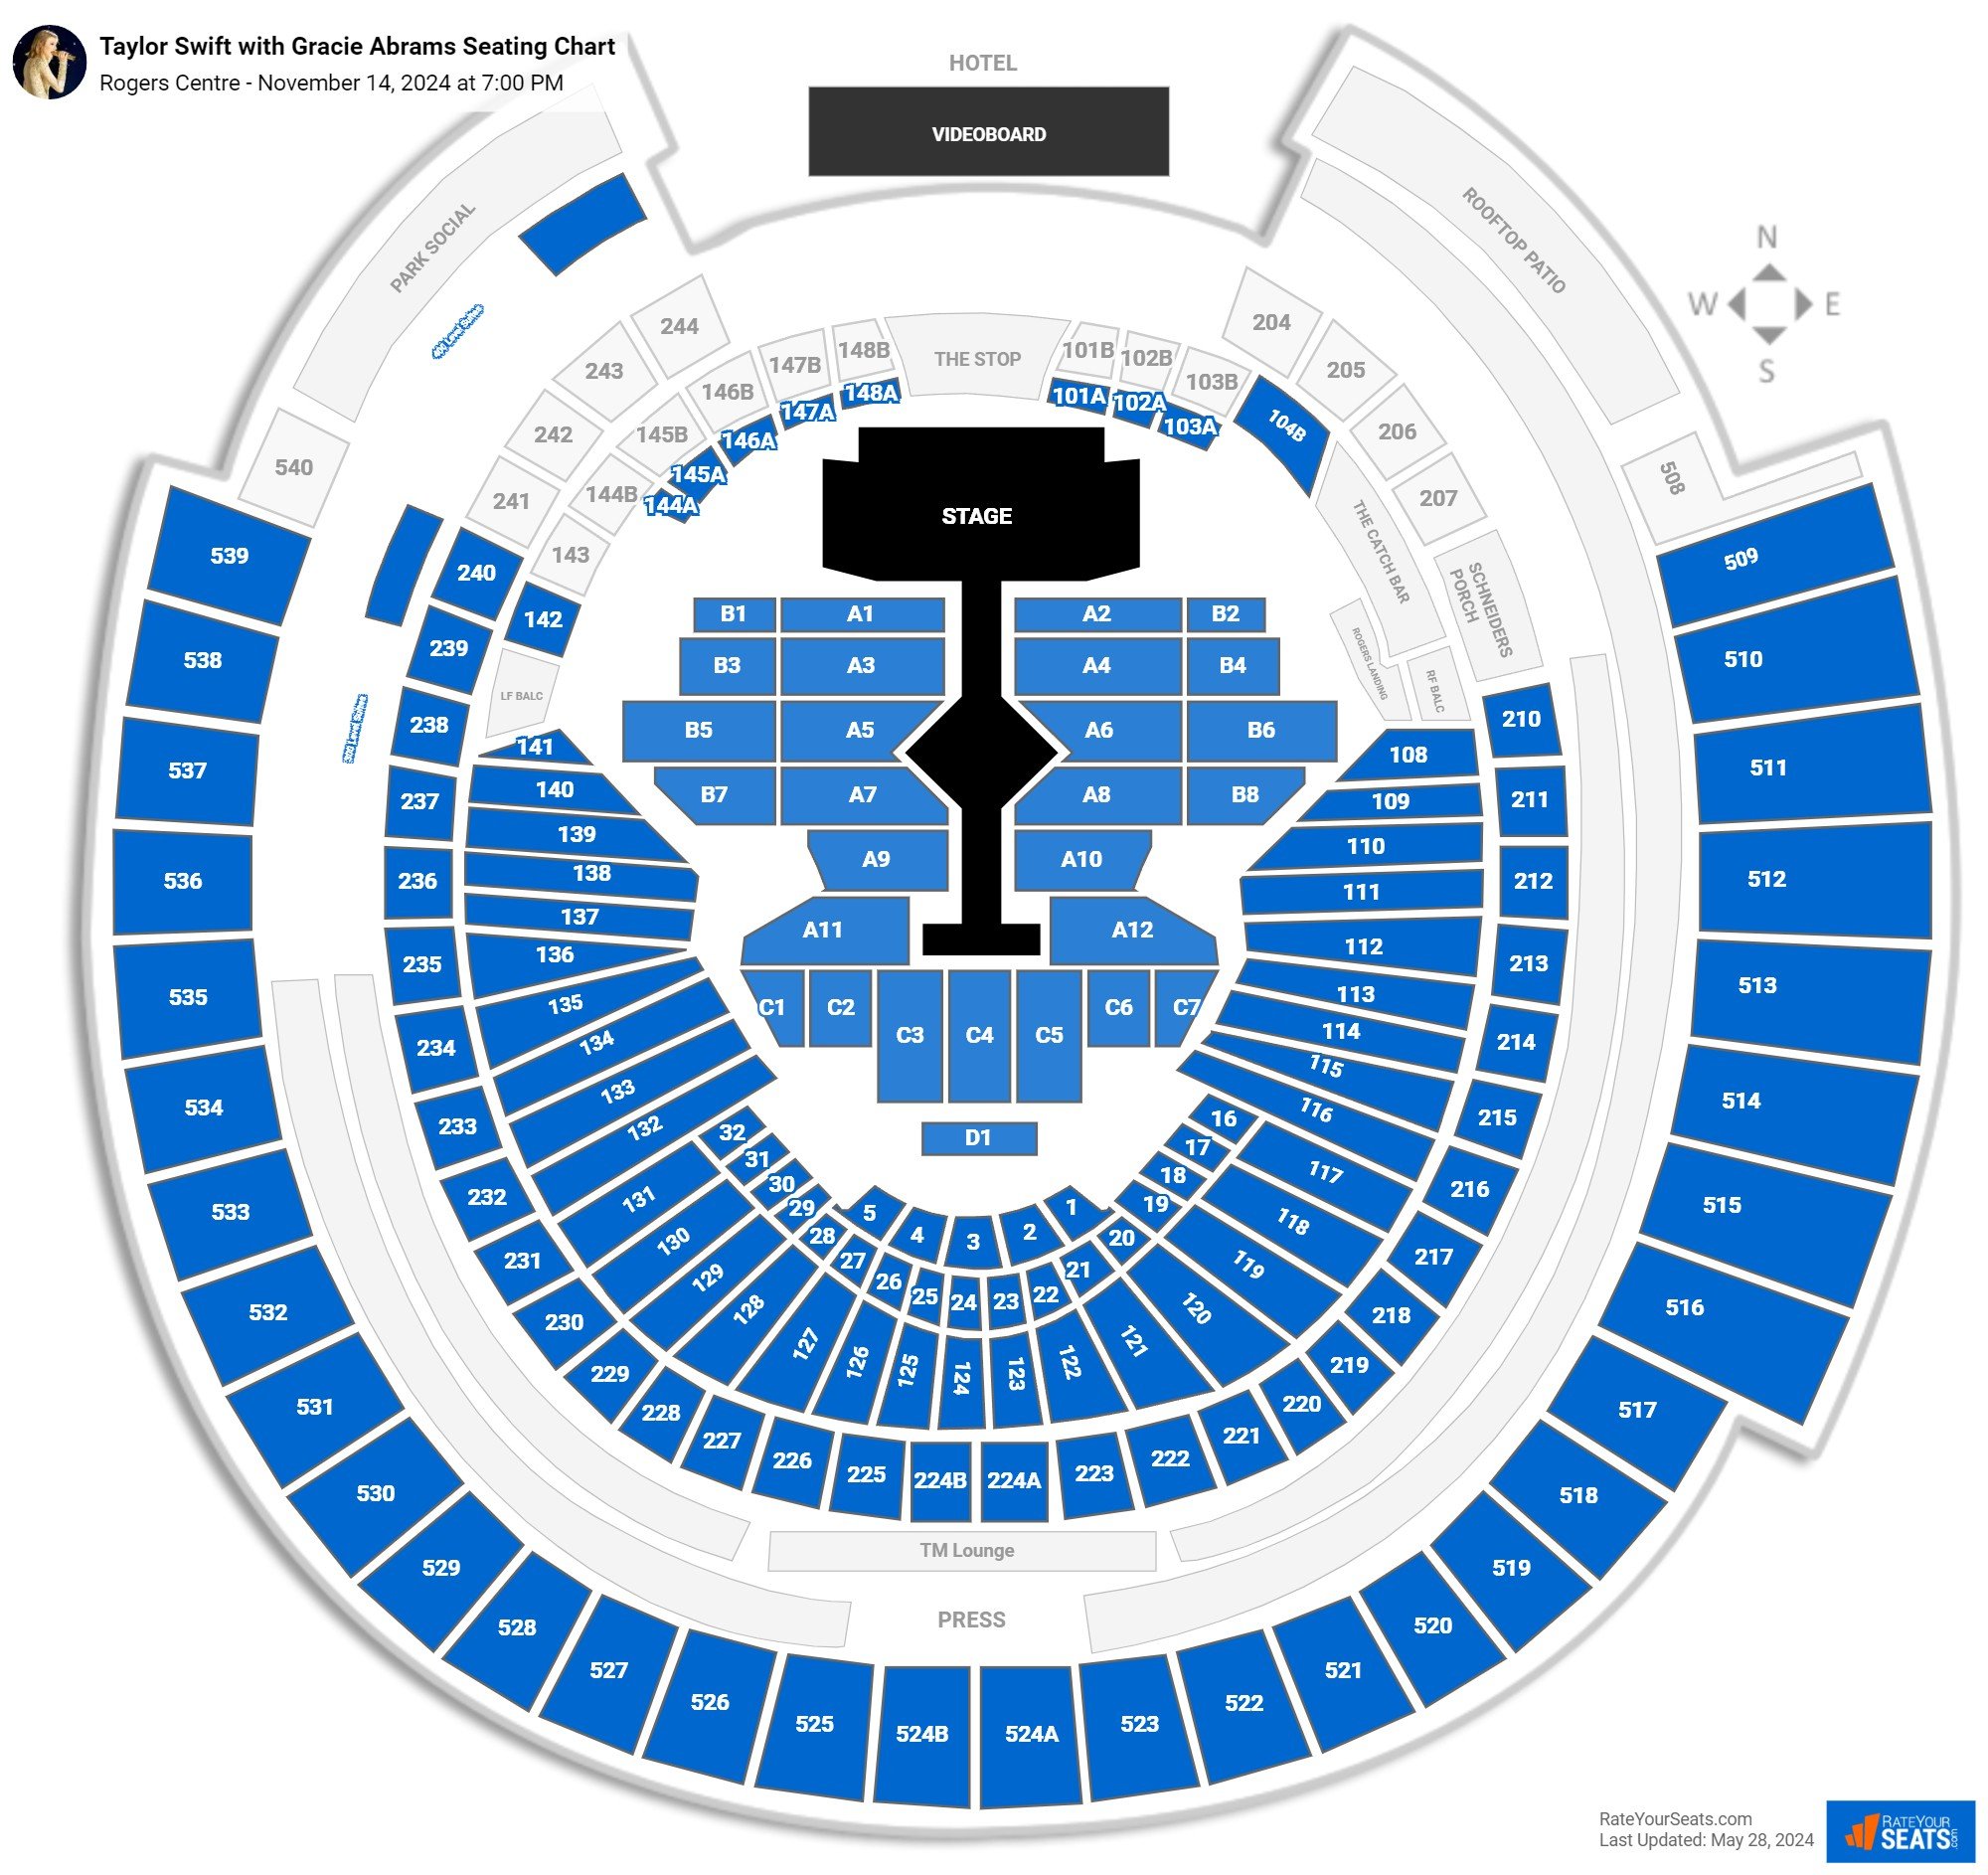 Taylor Swift with Gracie Abrams seating chart Rogers Centre